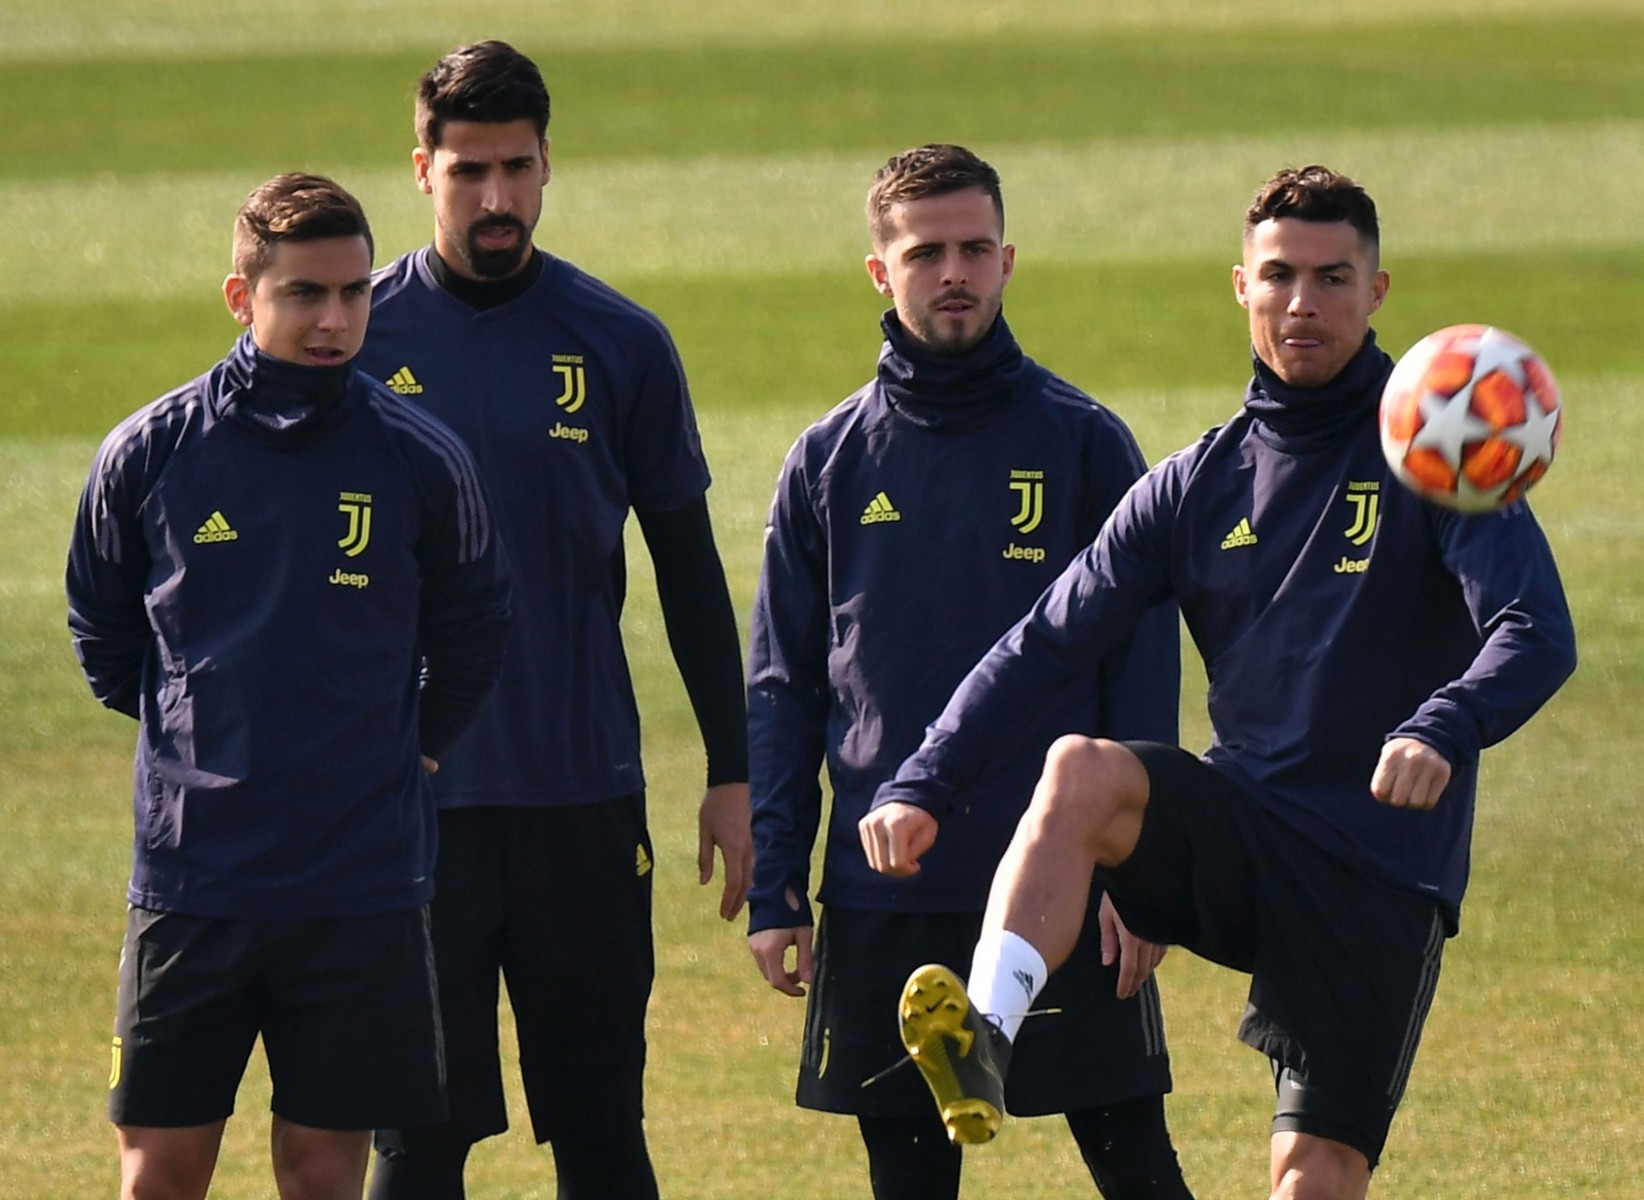 Paulo Dybala, left, and Cristiano ronaldo flank Juventus team-mates Sami Khedira and Miralem Pjanic - who have both left virus-hit Turin for other countries